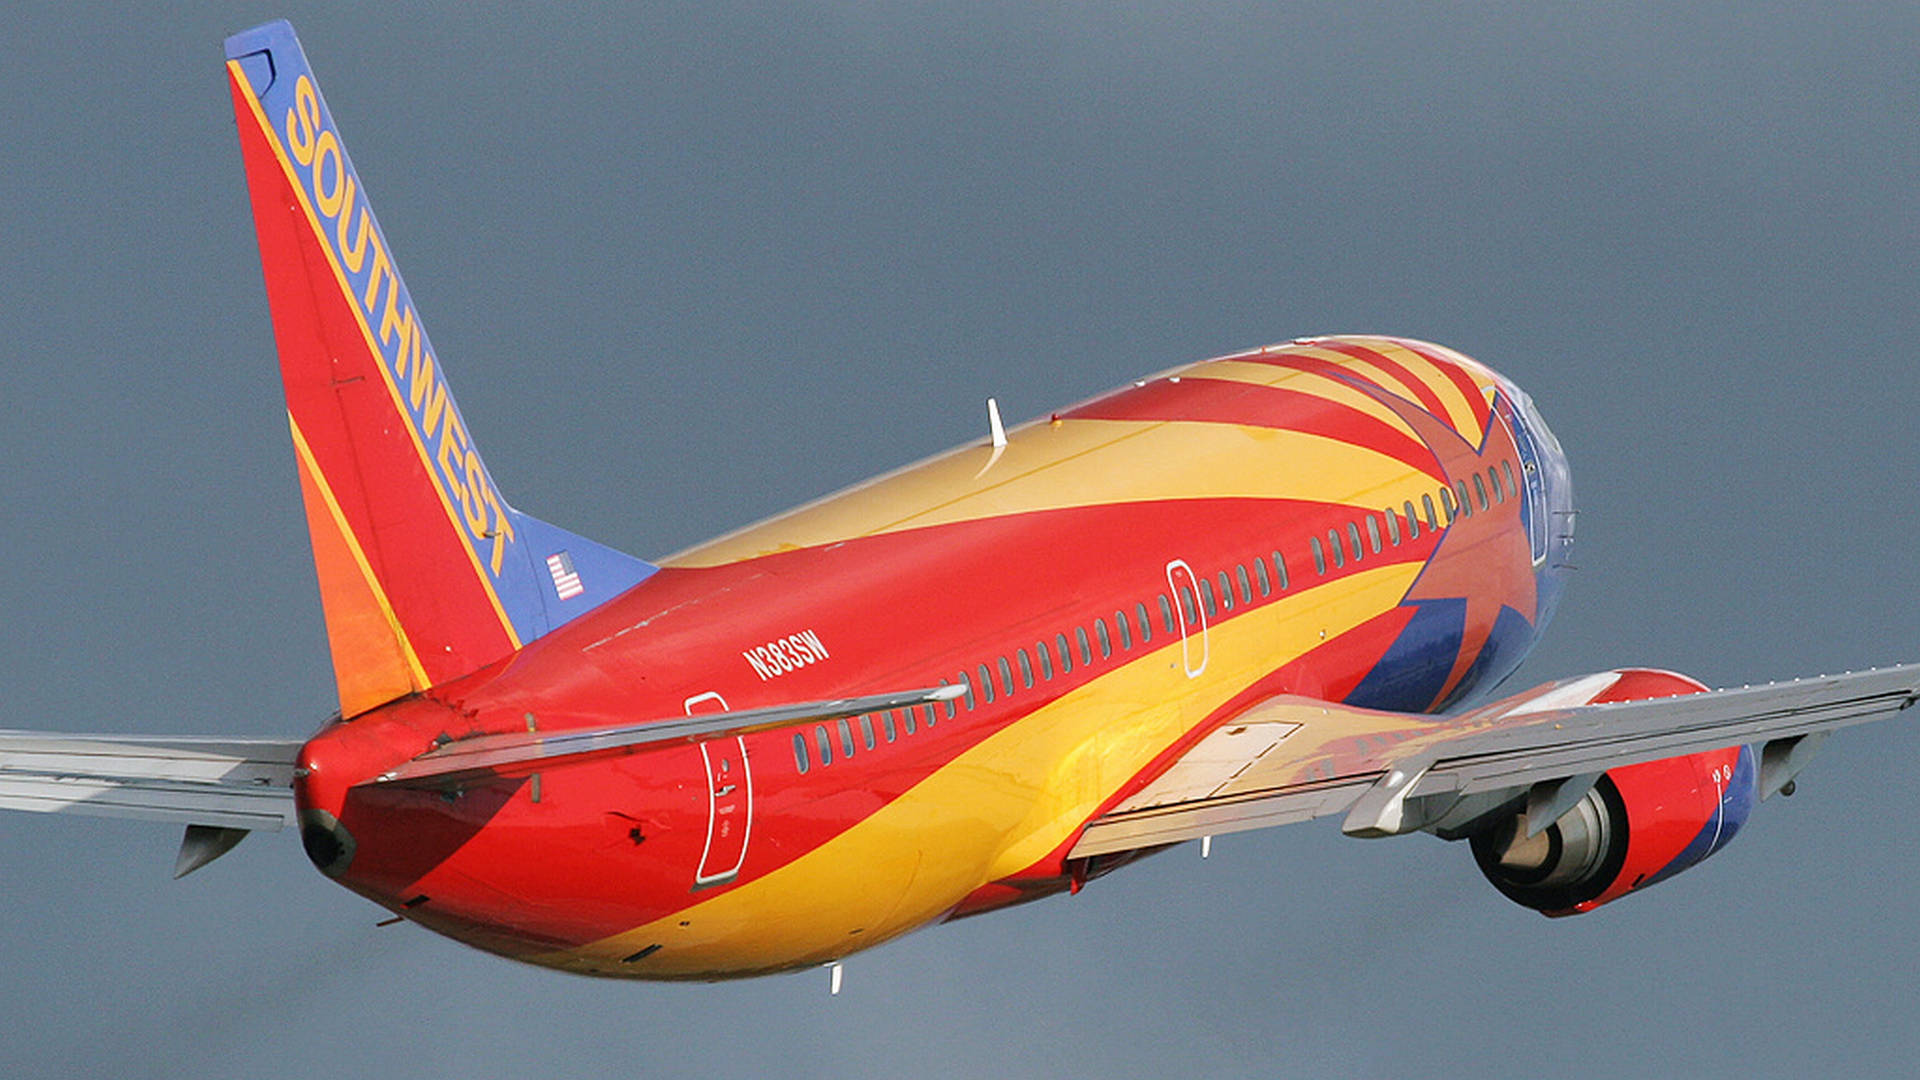 Southwest Airlines Colorful Airplane Wallpaper